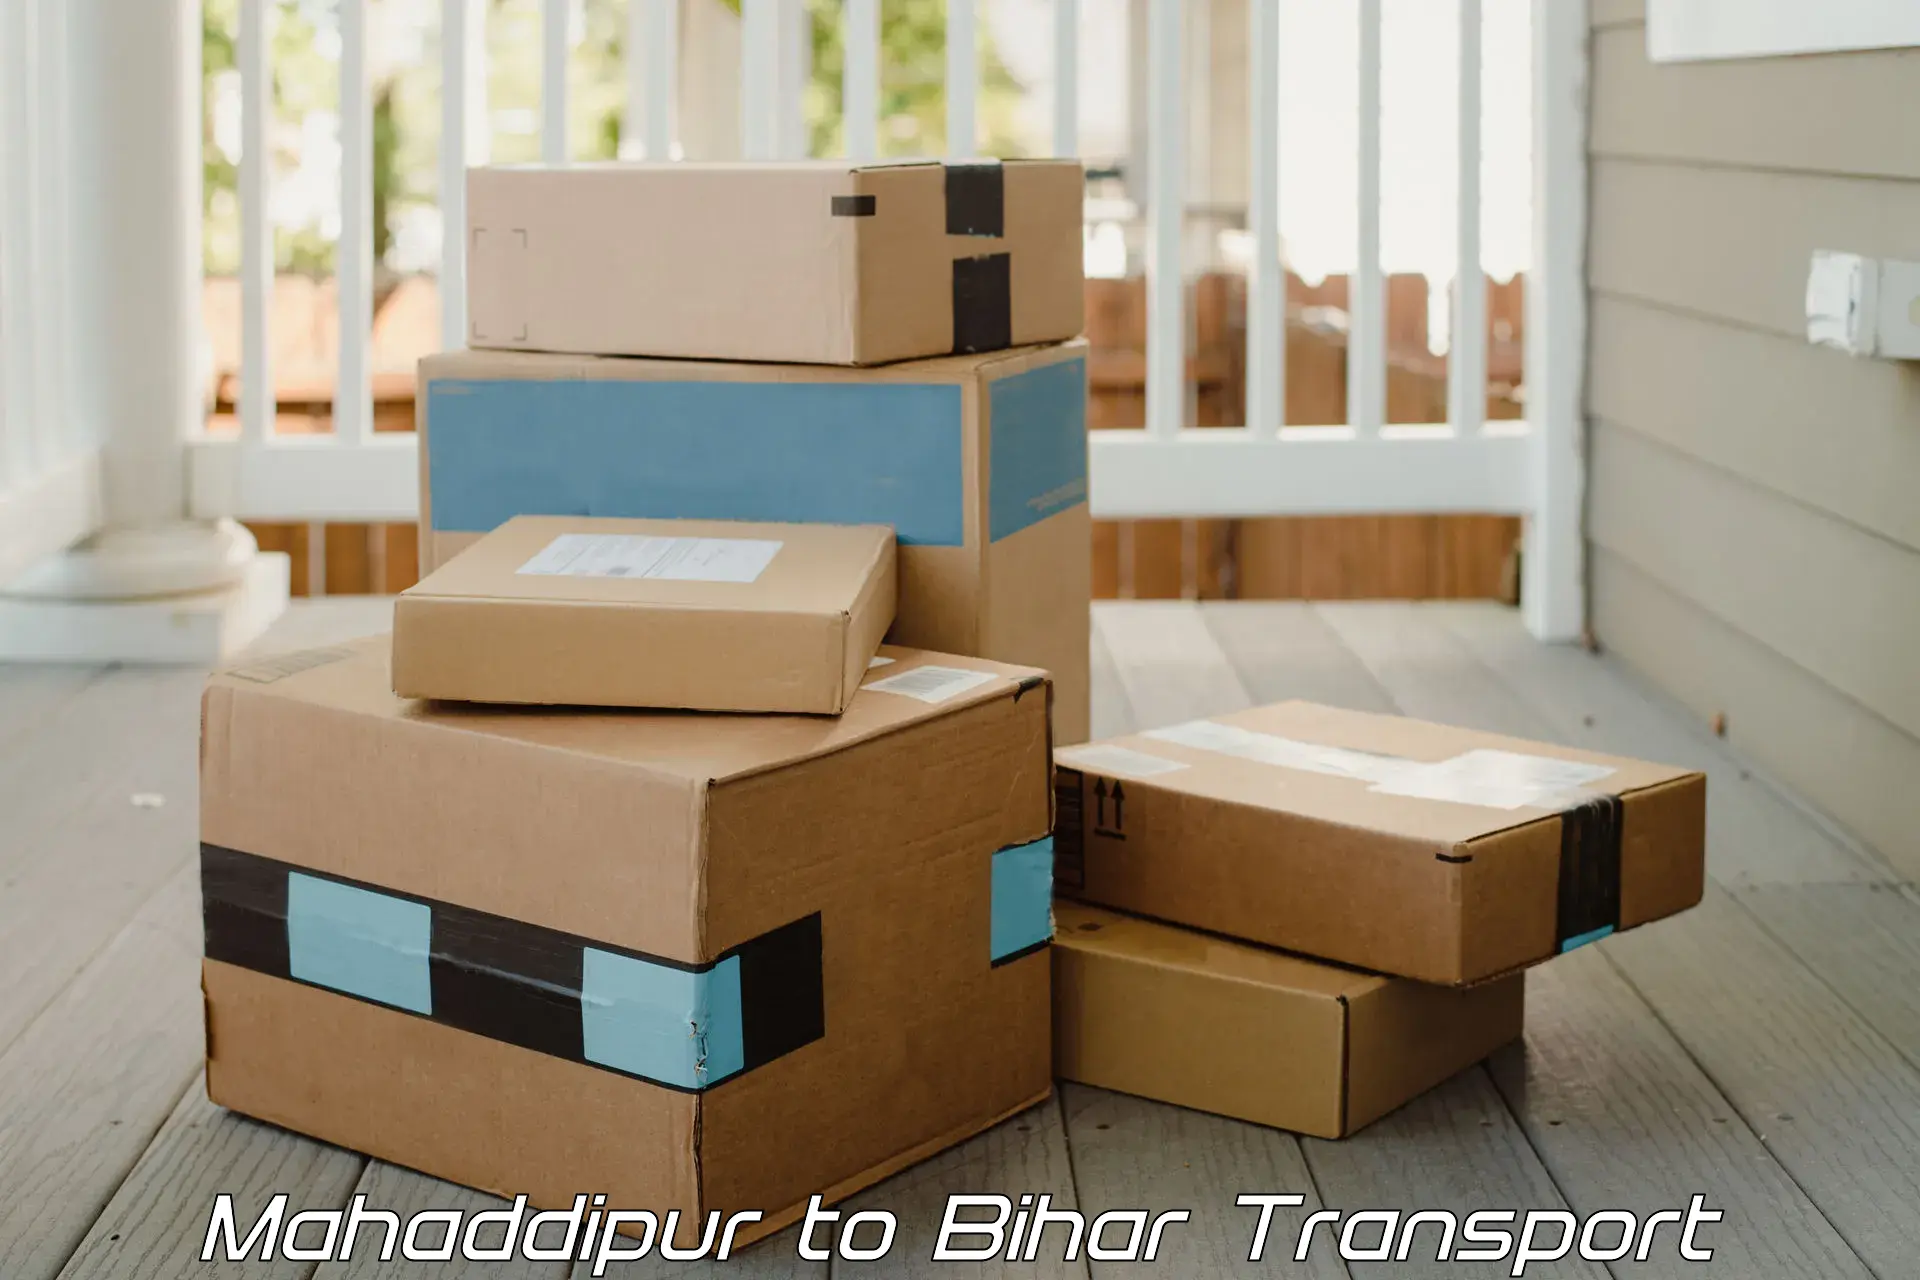 Air freight transport services Mahaddipur to Biraul